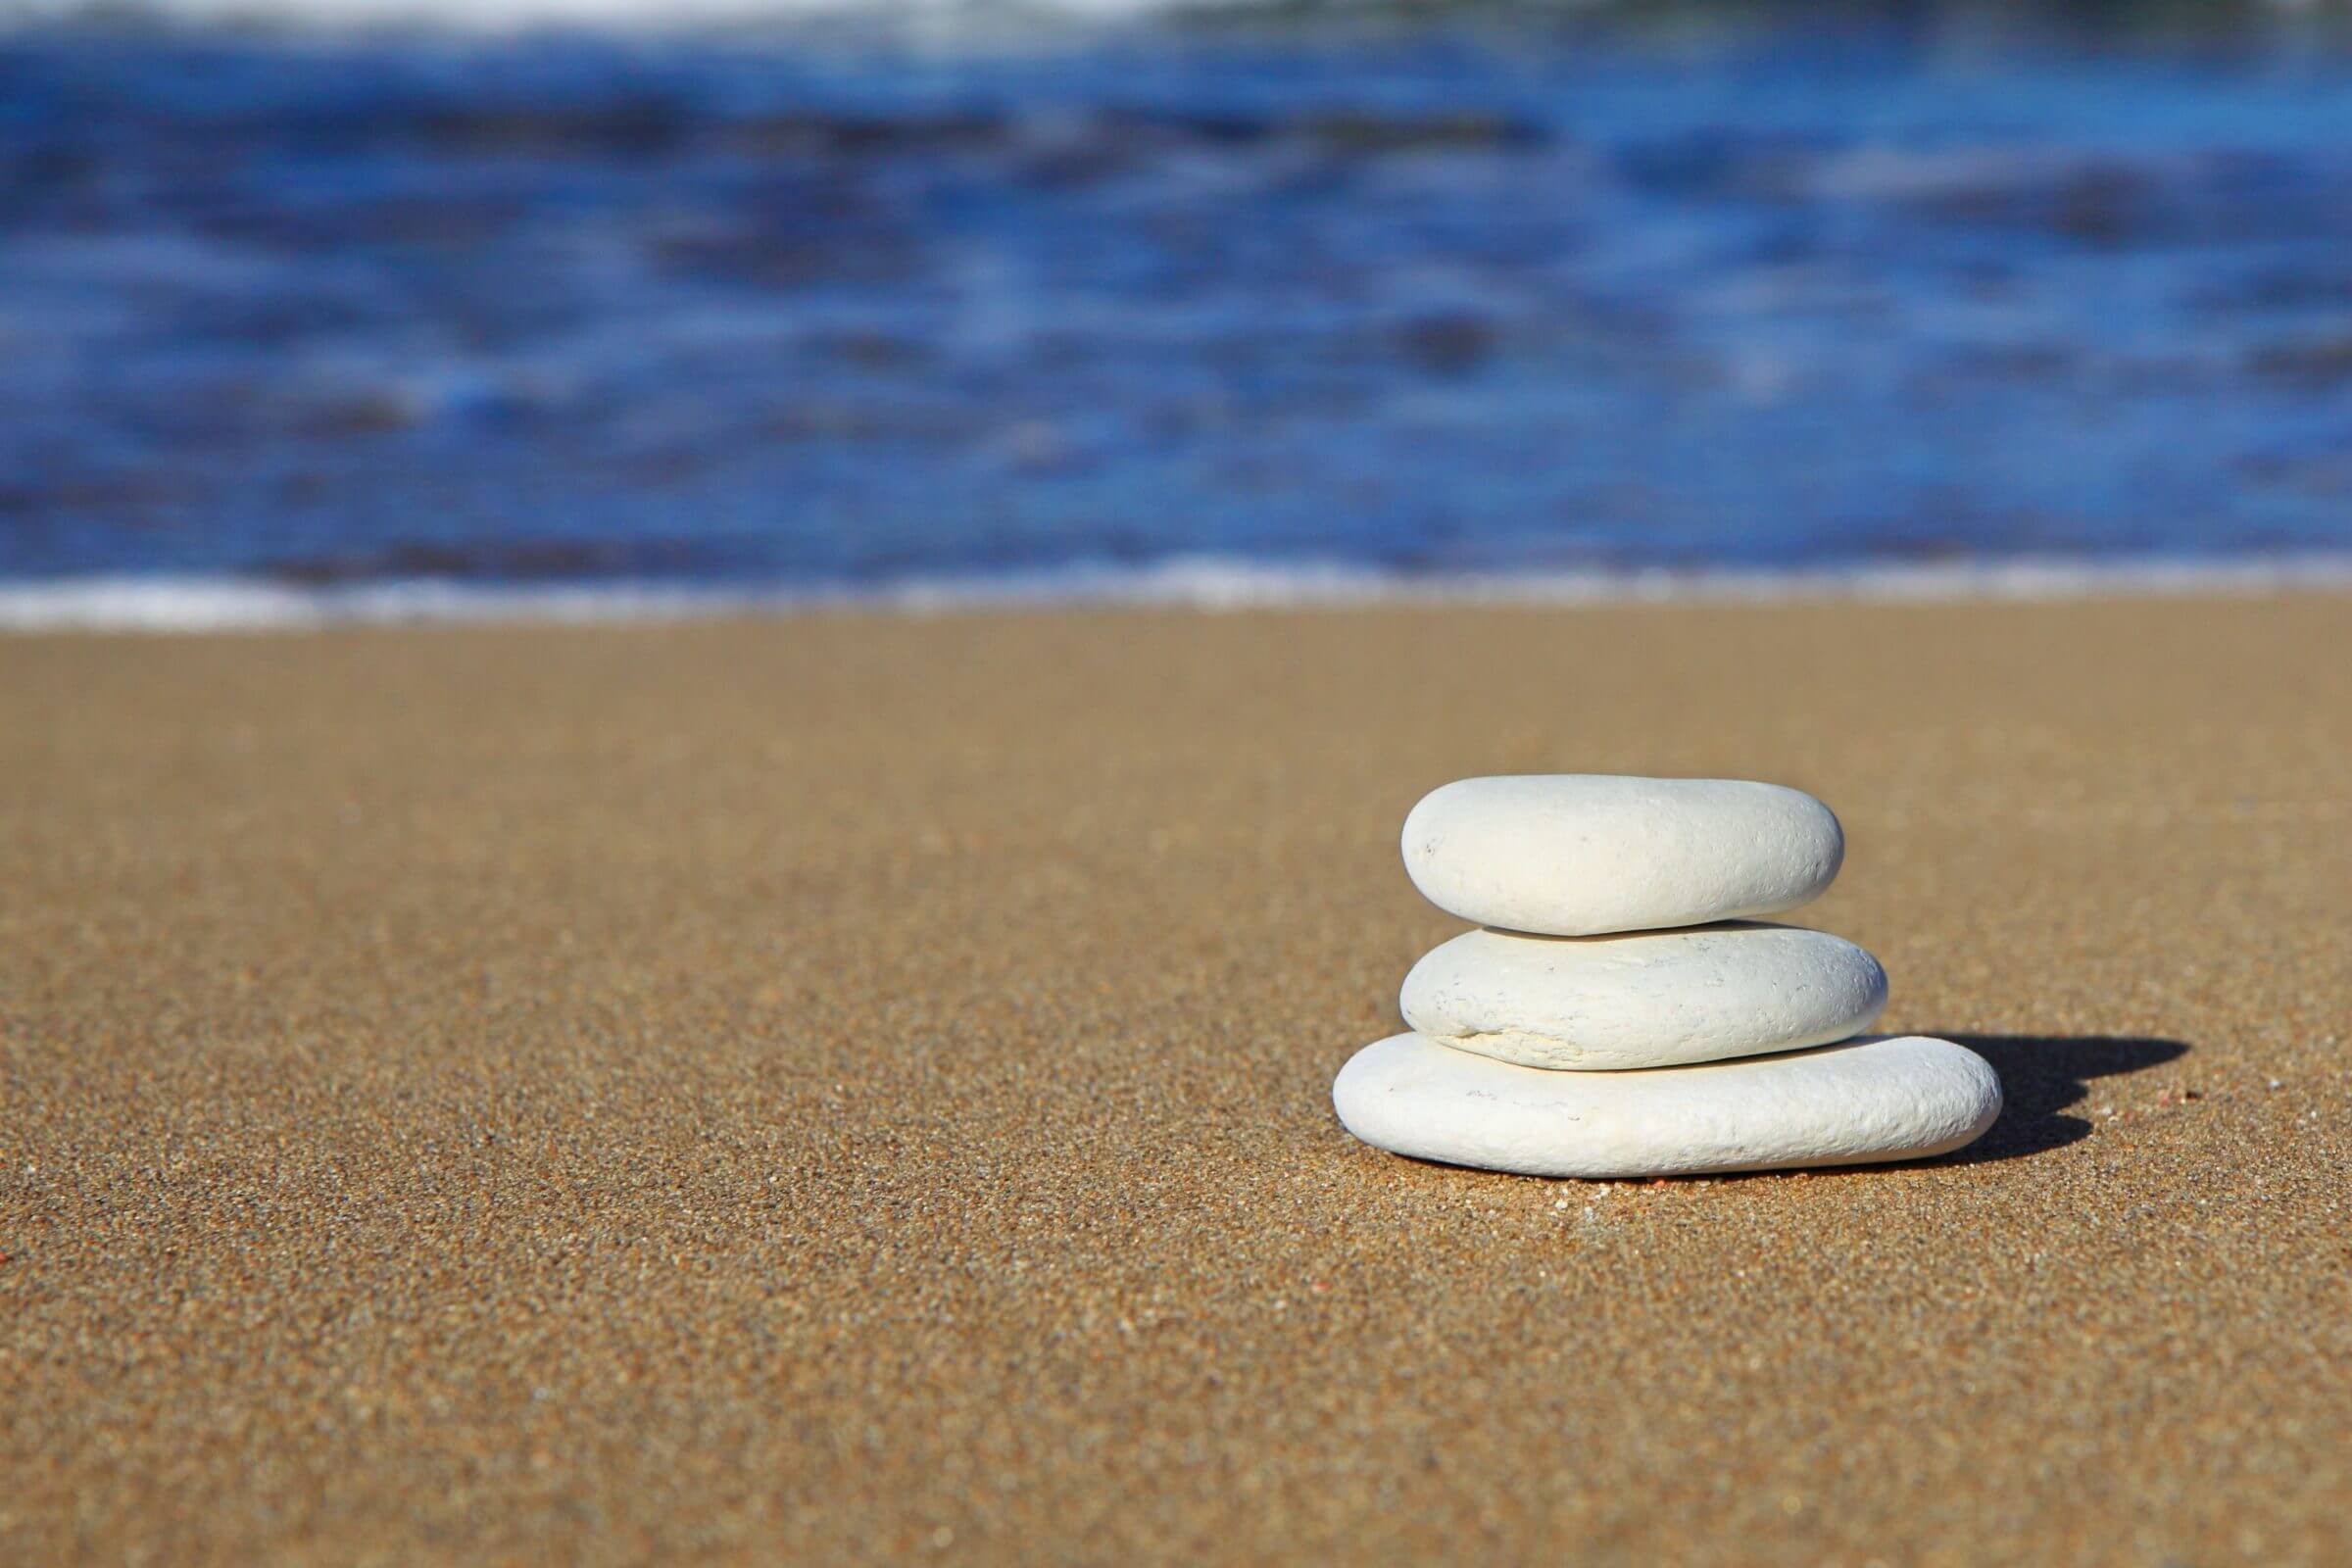 Three pale, flat shaped stones piled on top of one another. In the background is a blurred sea shore.